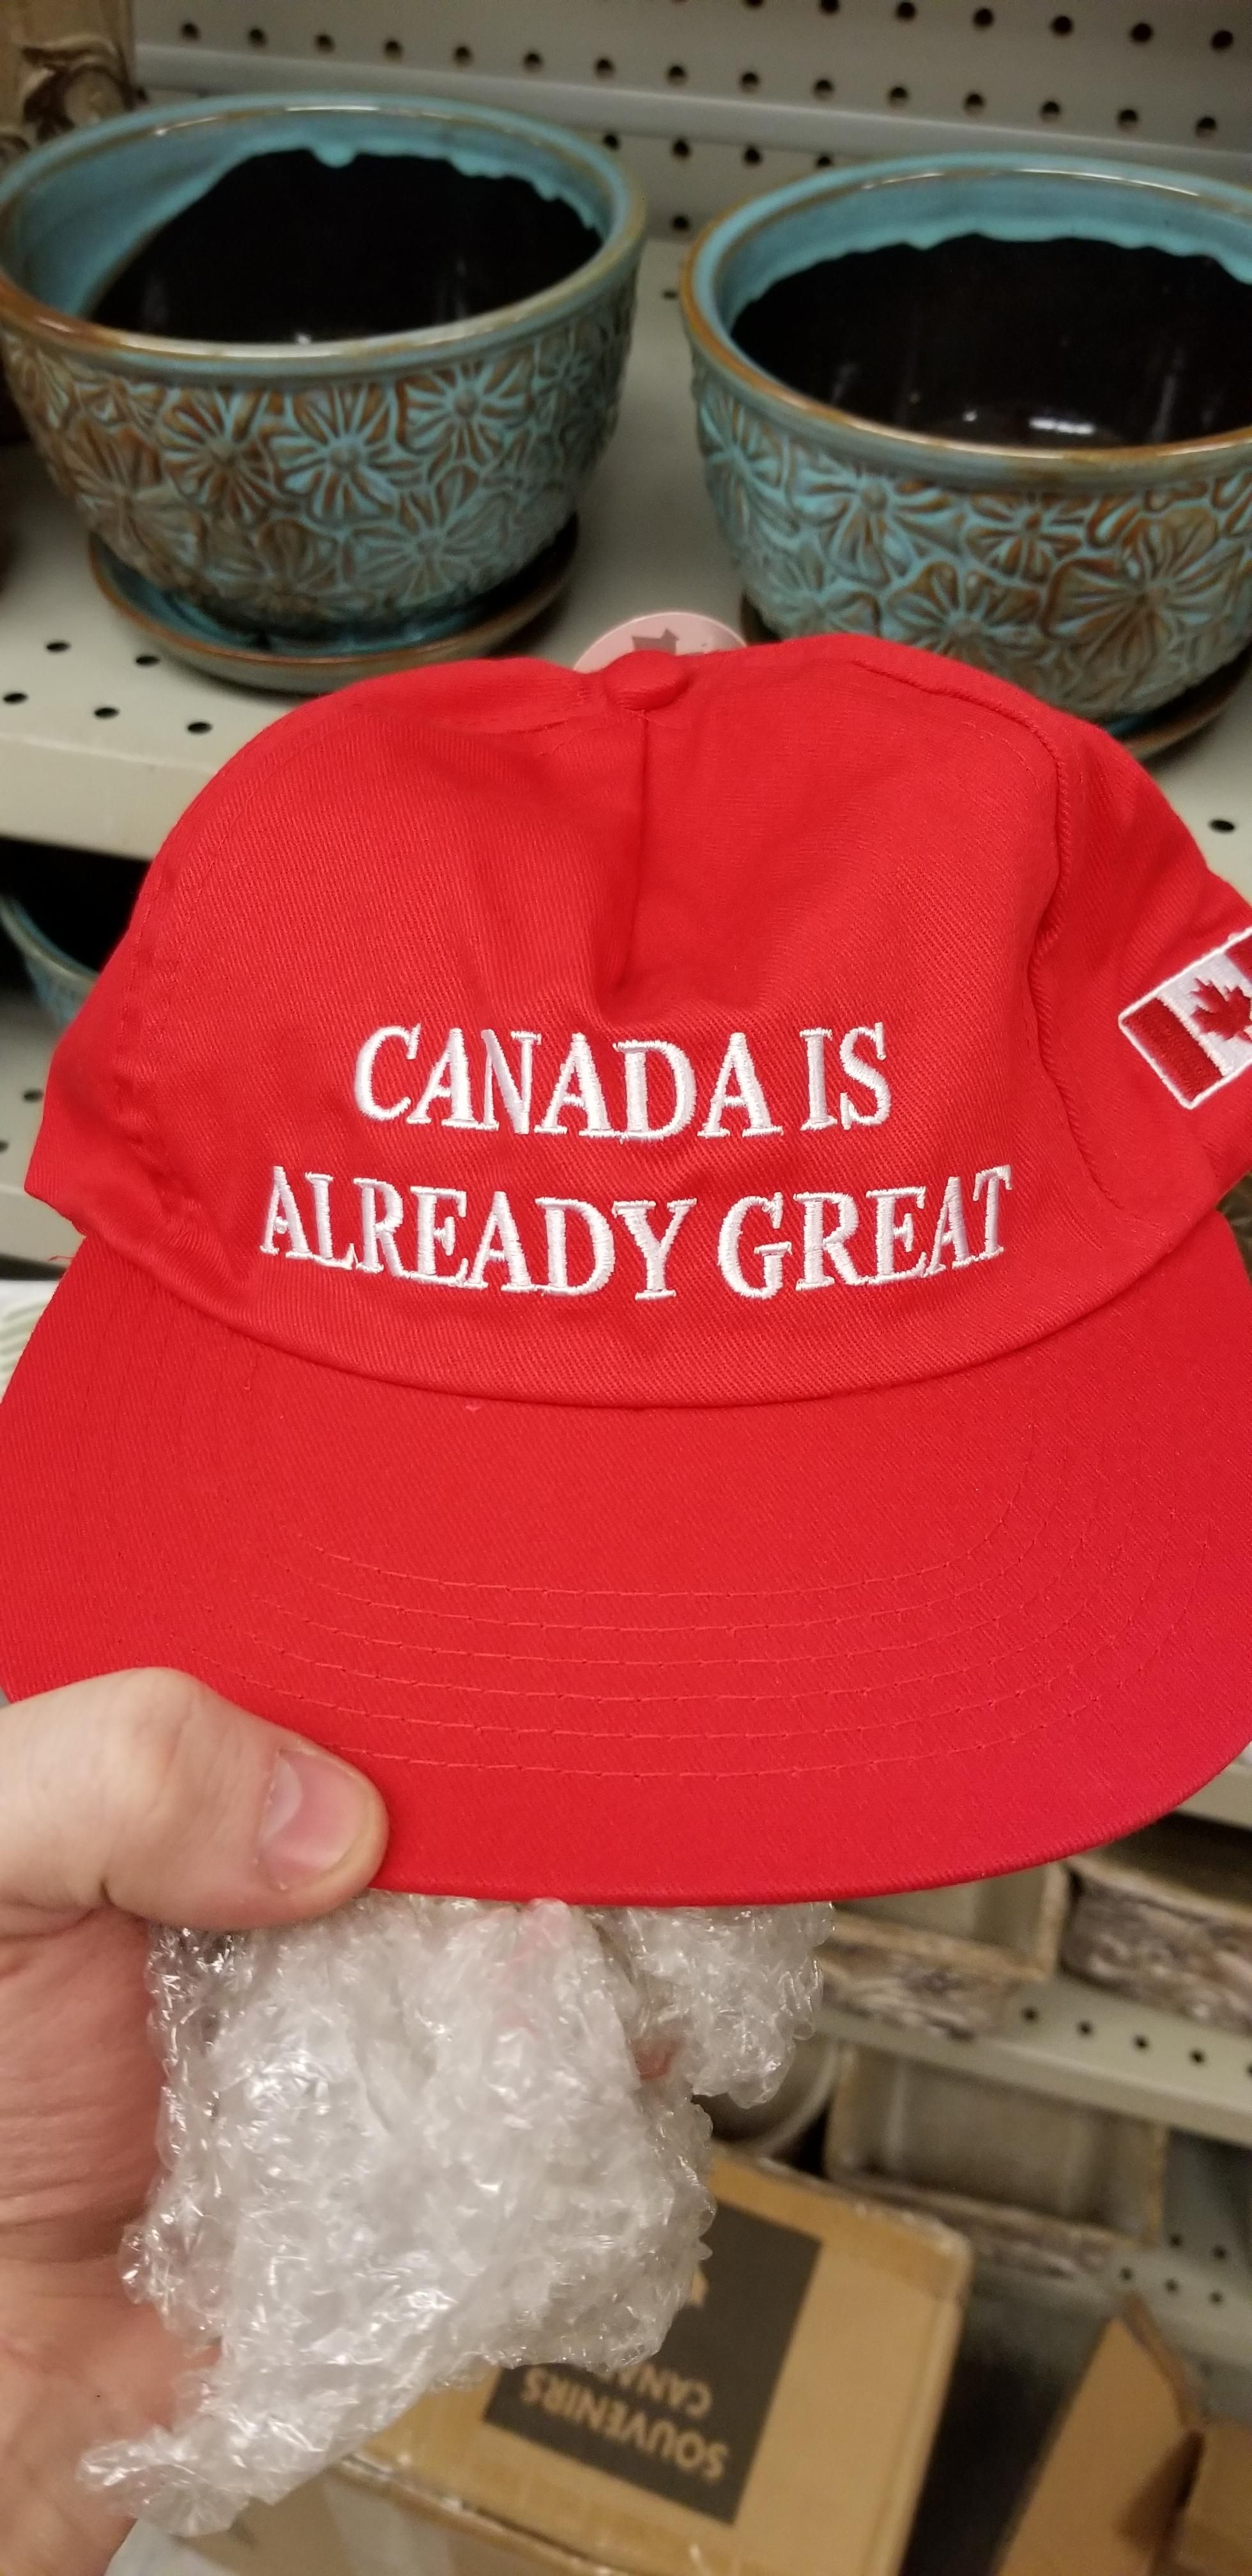 Found this hat for Canada Day.